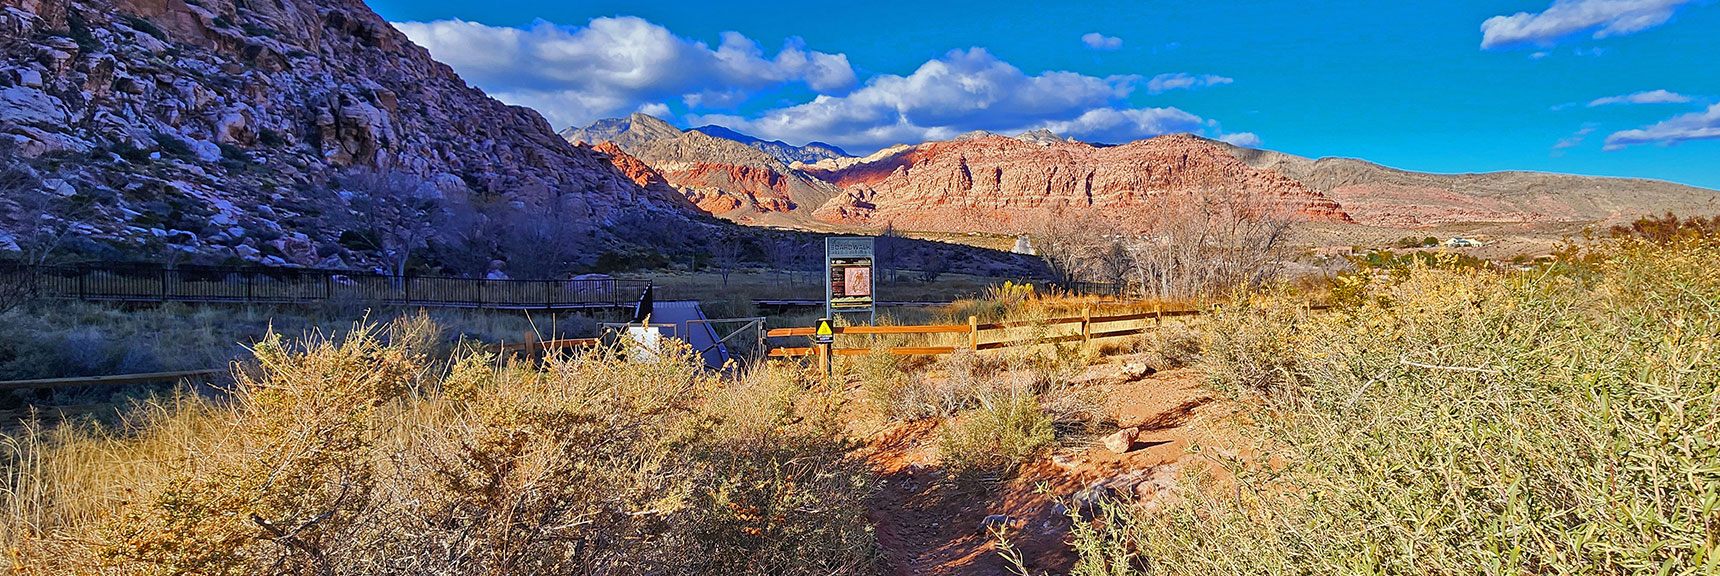 Entering the Red Springs Desert Oasis Boardwalk Area | Lower Calico Hills Loop | Calico Basin & Red Rock Canyon, Nevada